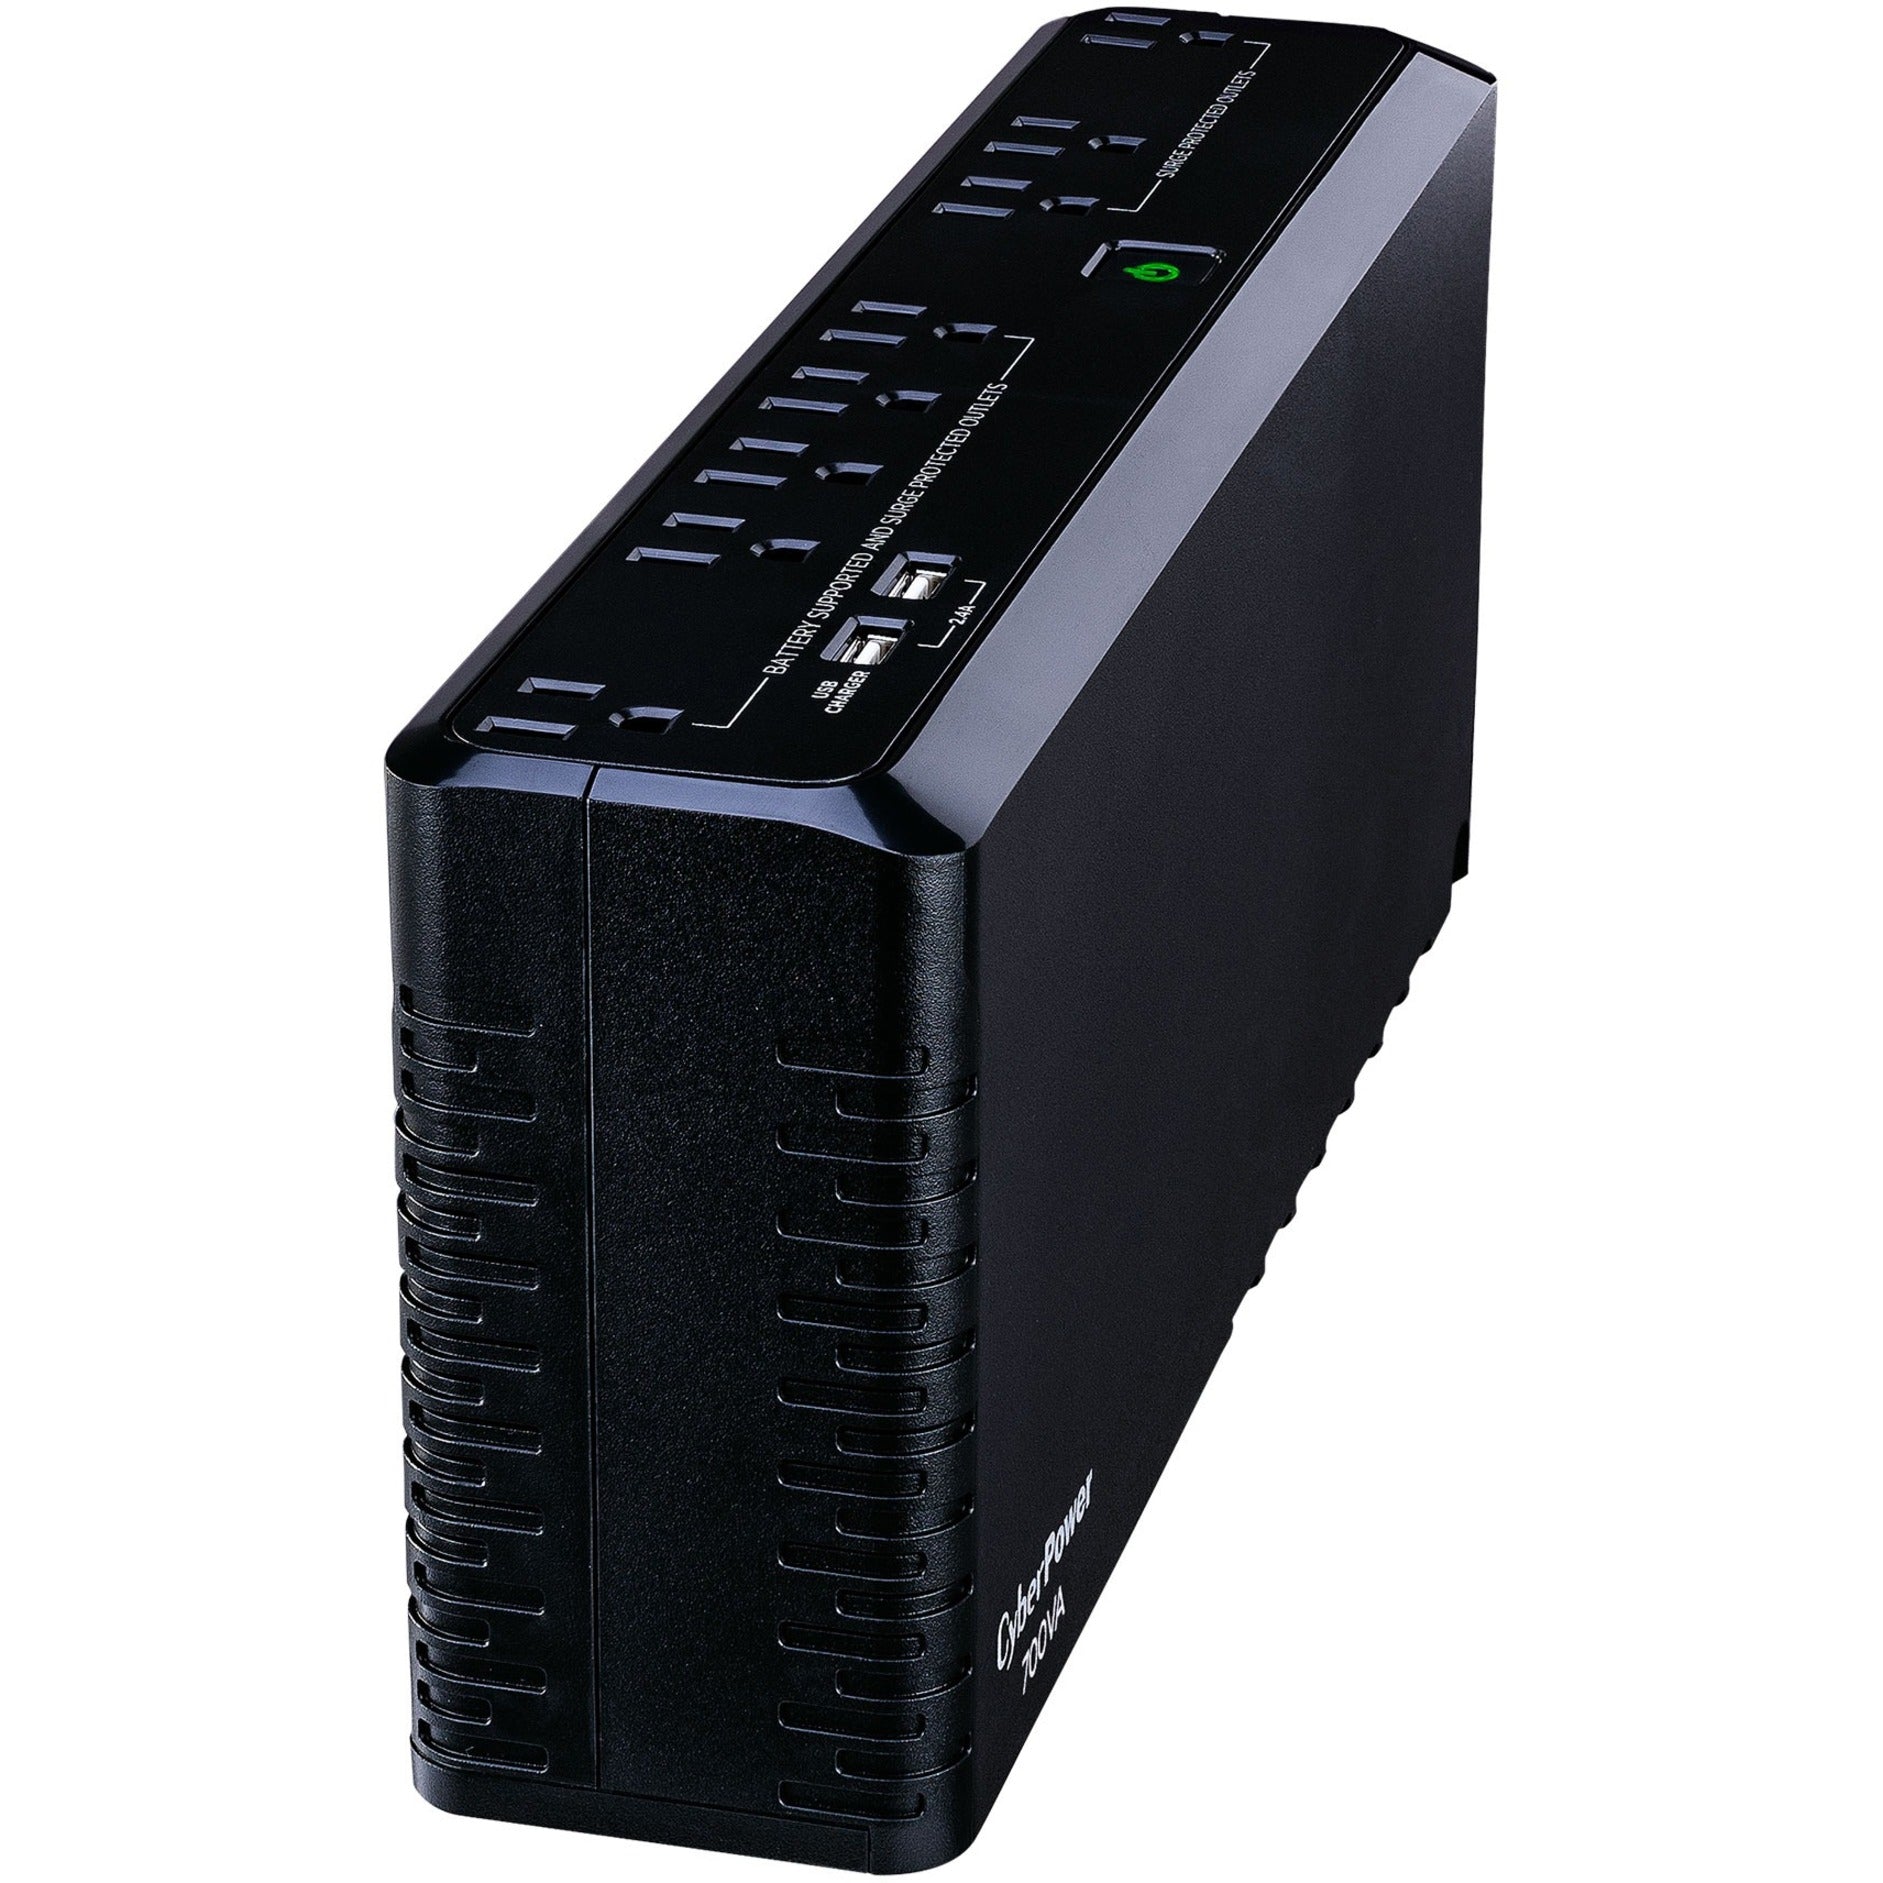 CyberPower SL700U Standby UPS 8 Outlets 5 ft Cord 3 Year Warranty